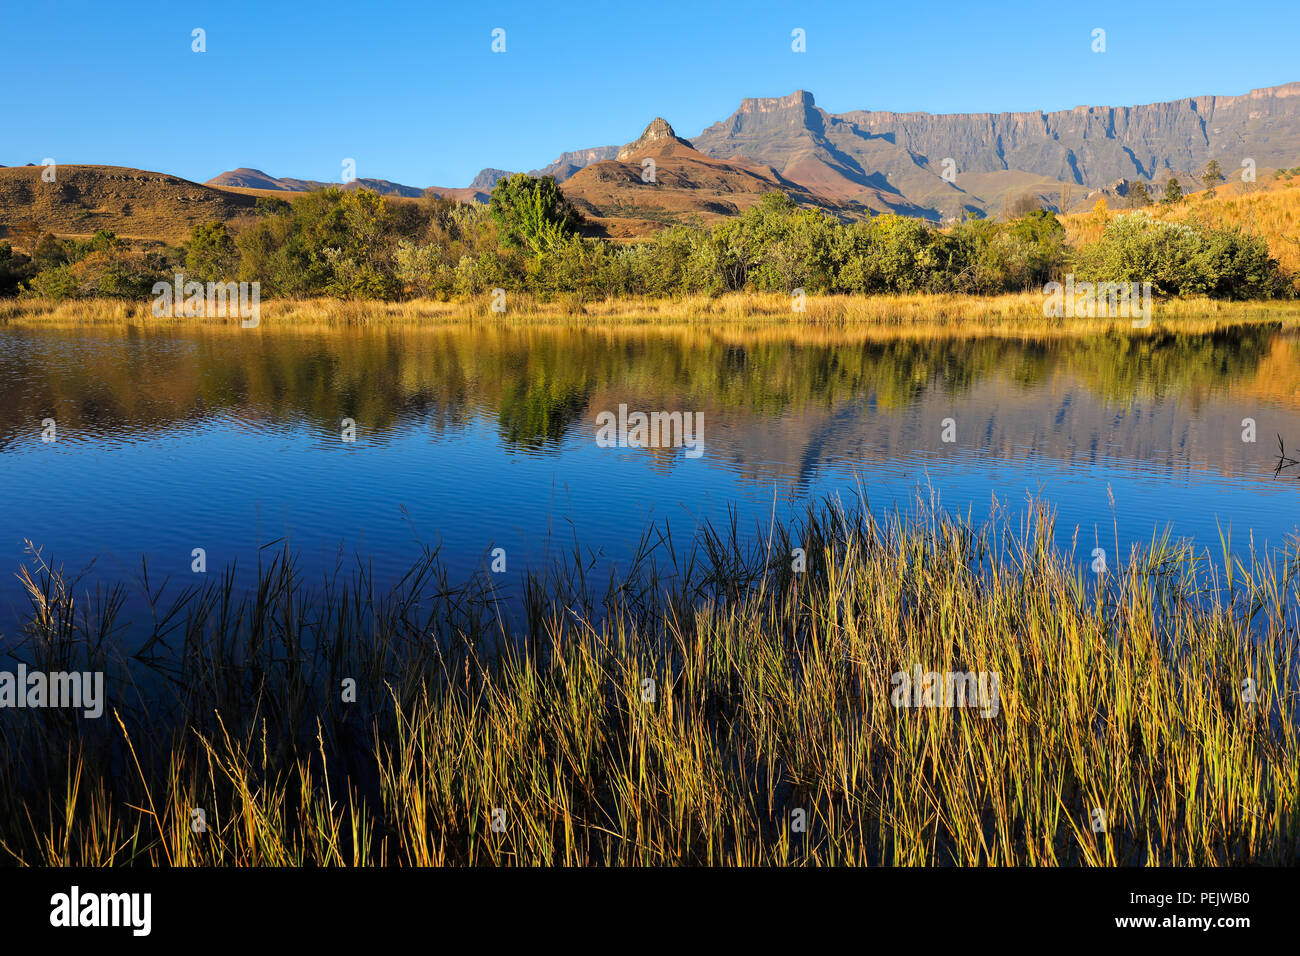 Drakensberg mountains with reflection in water, Royal Natal National Park, South Africa Stock Photo